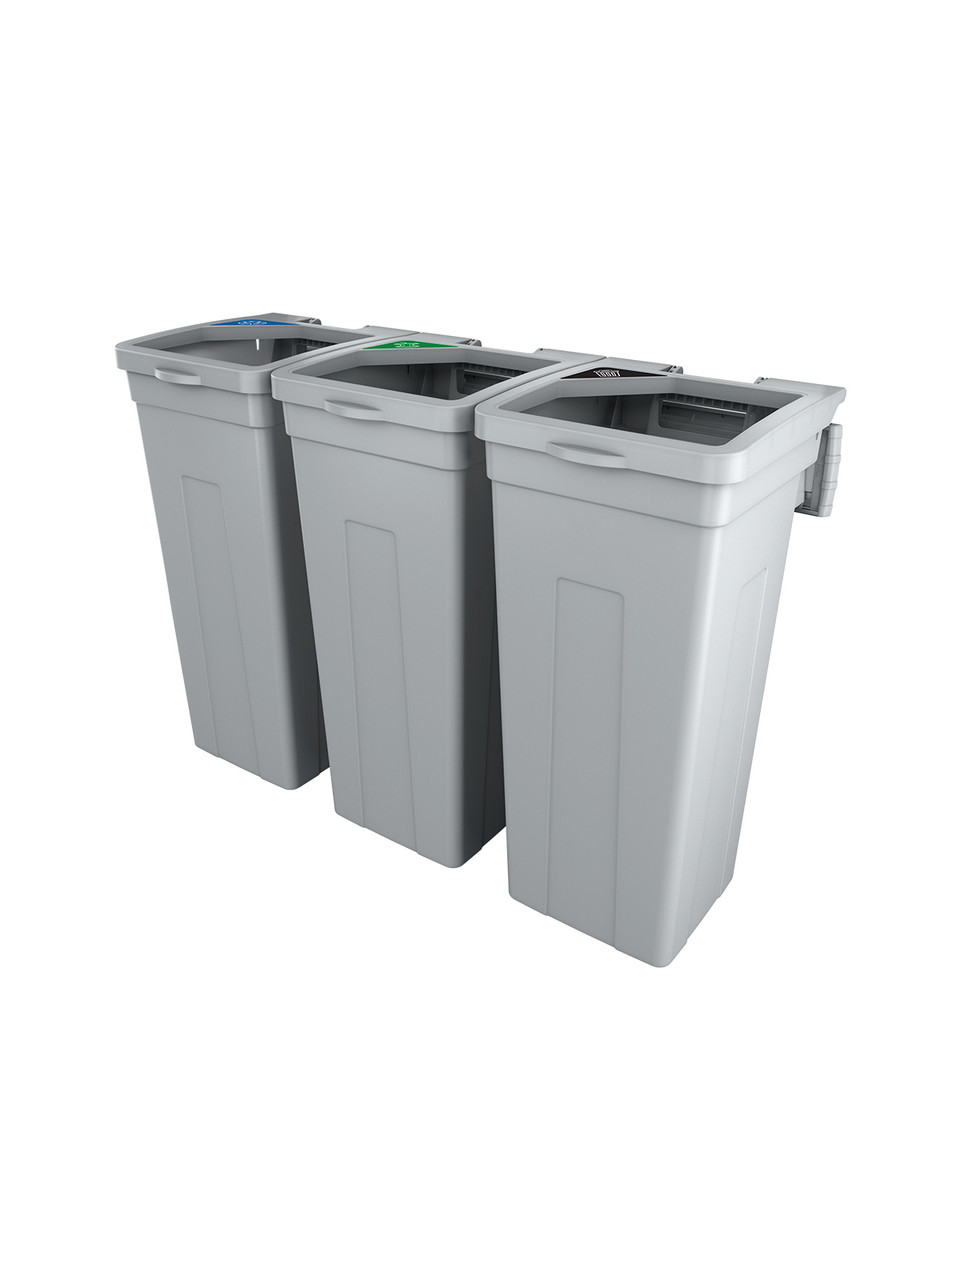 The Rise Triple 45 Gallon Wall Mounted Waste Receptacles and Recycle Bins